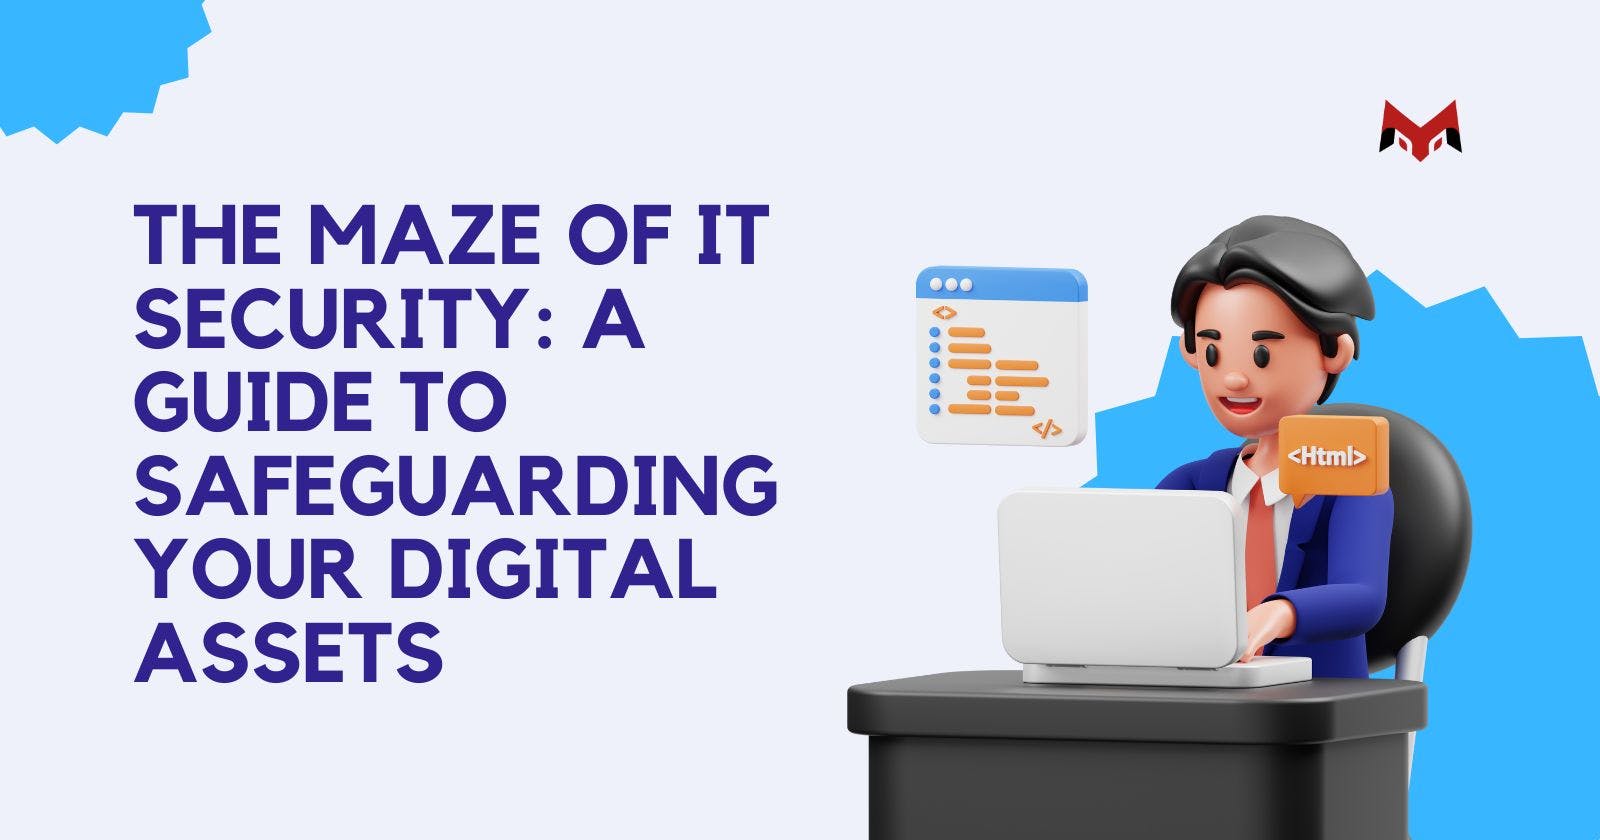 The Maze of IT Security: A Guide to Safeguarding Your Digital Assets